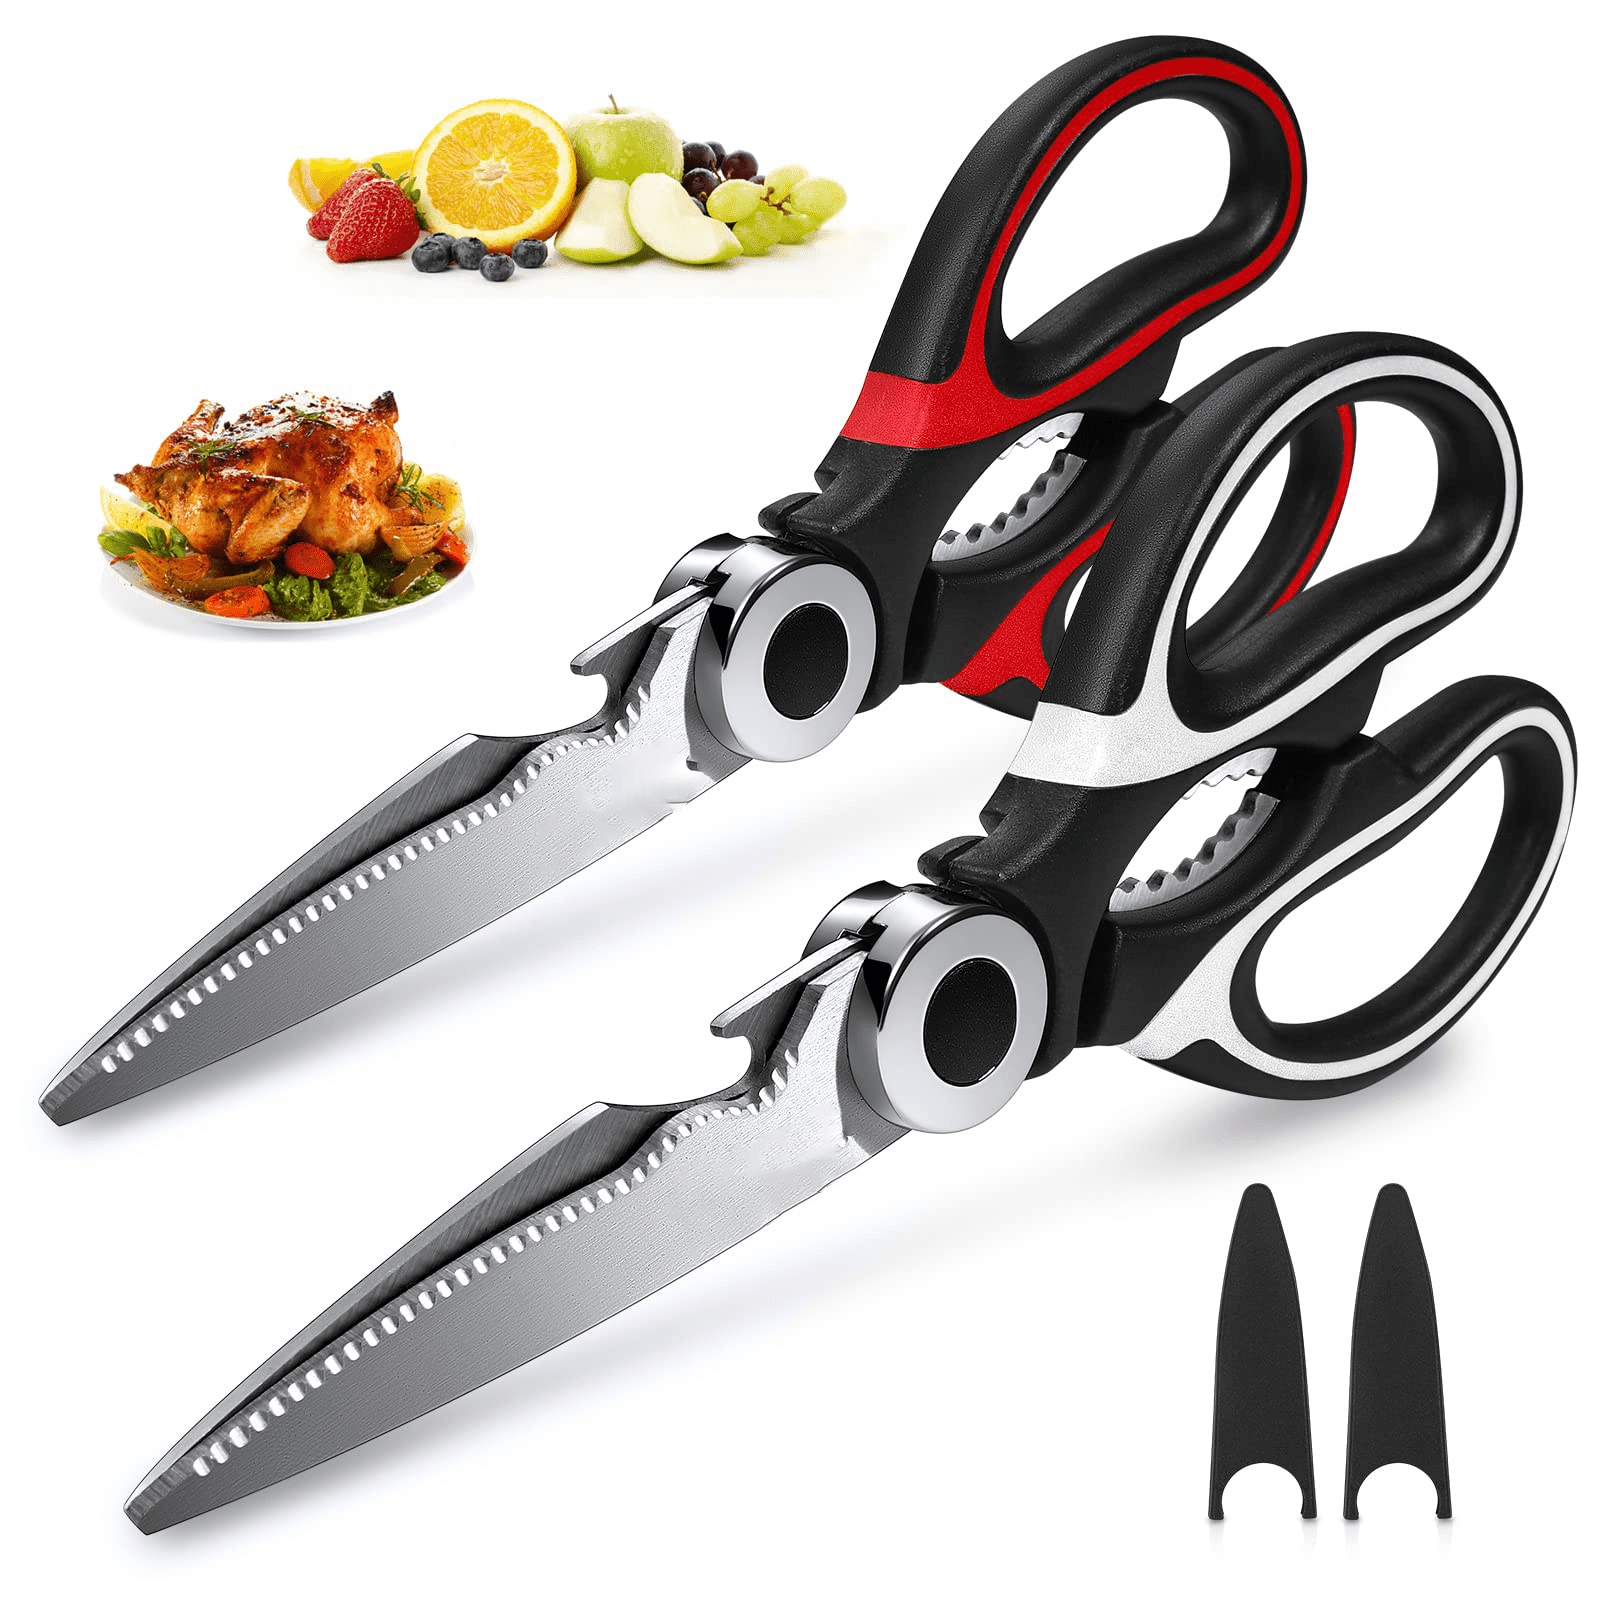 New York Post على X: The price of these KitchenAid Shears is cut